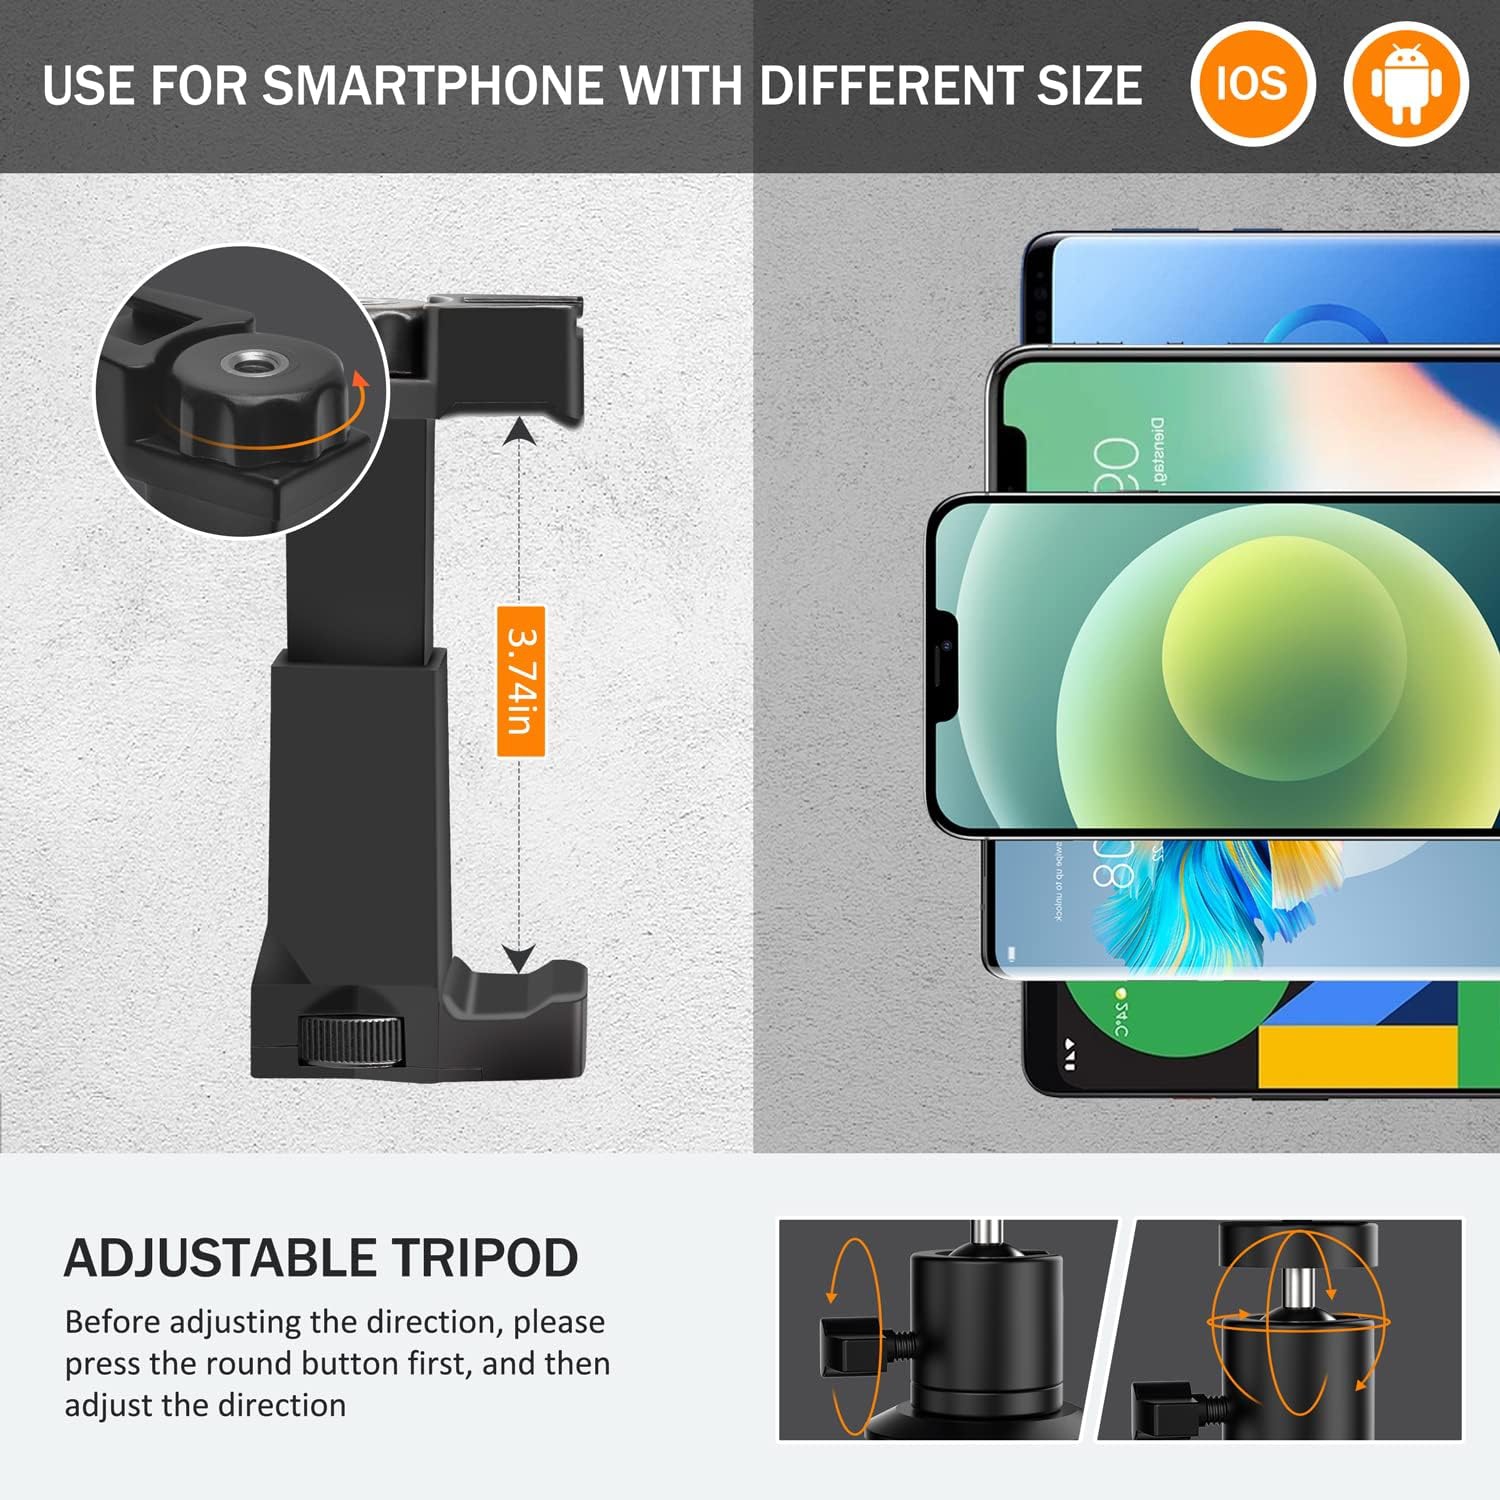 Smartphone Microphone Kit with Tripod, Microphone for iPhone 6, 7